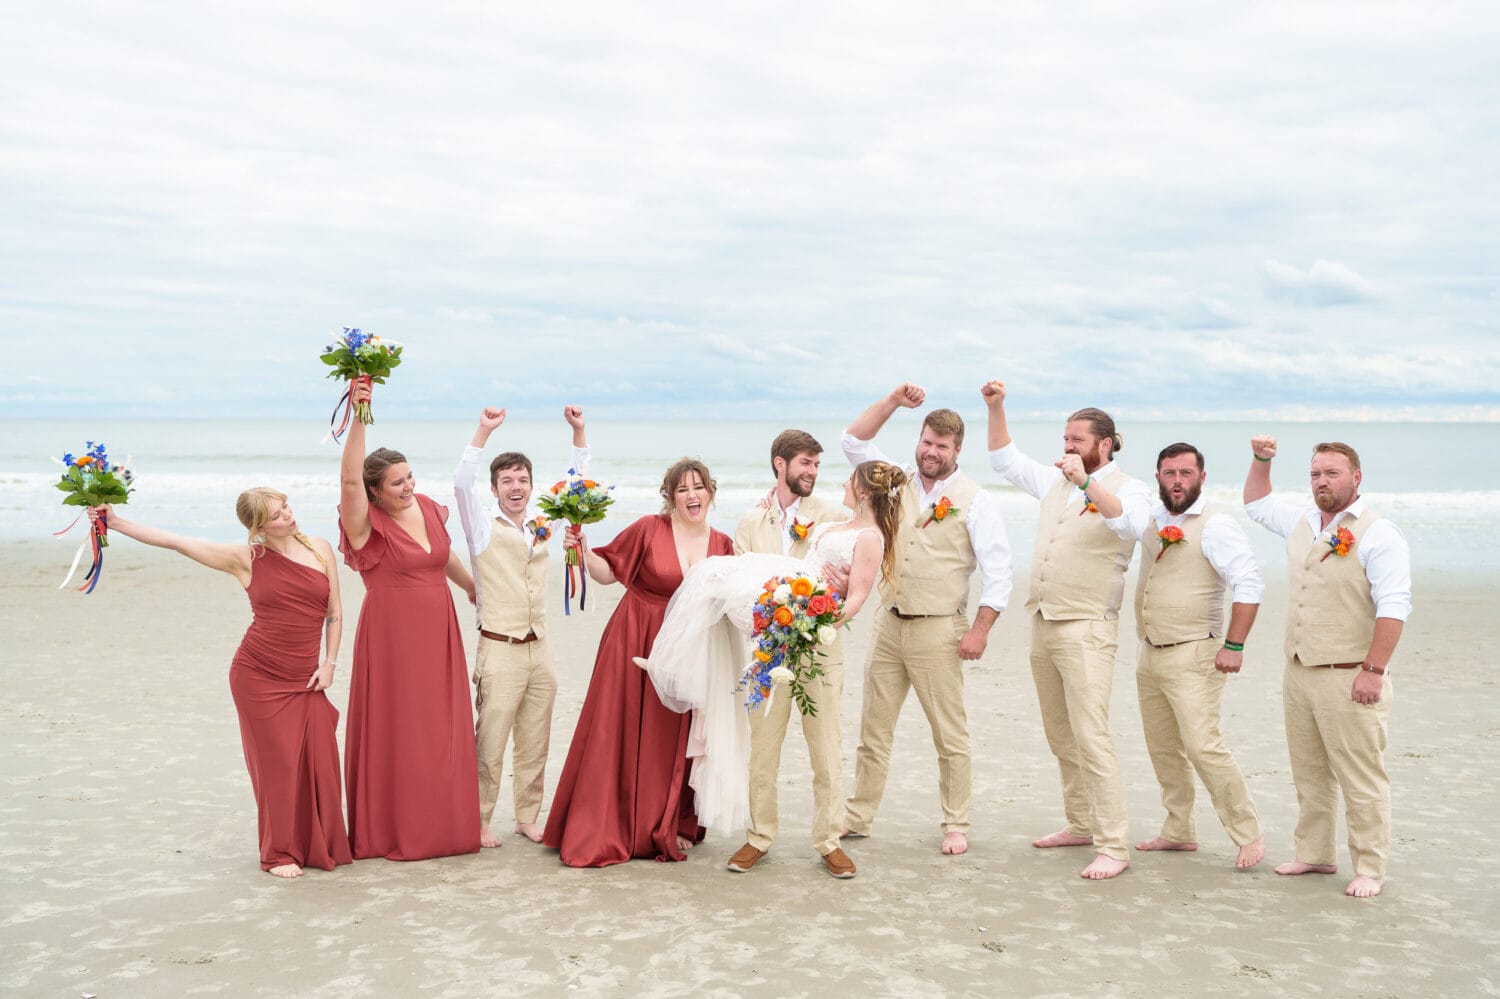 Fun with the wedding party - 21 Main Events - North Myrtle Beach